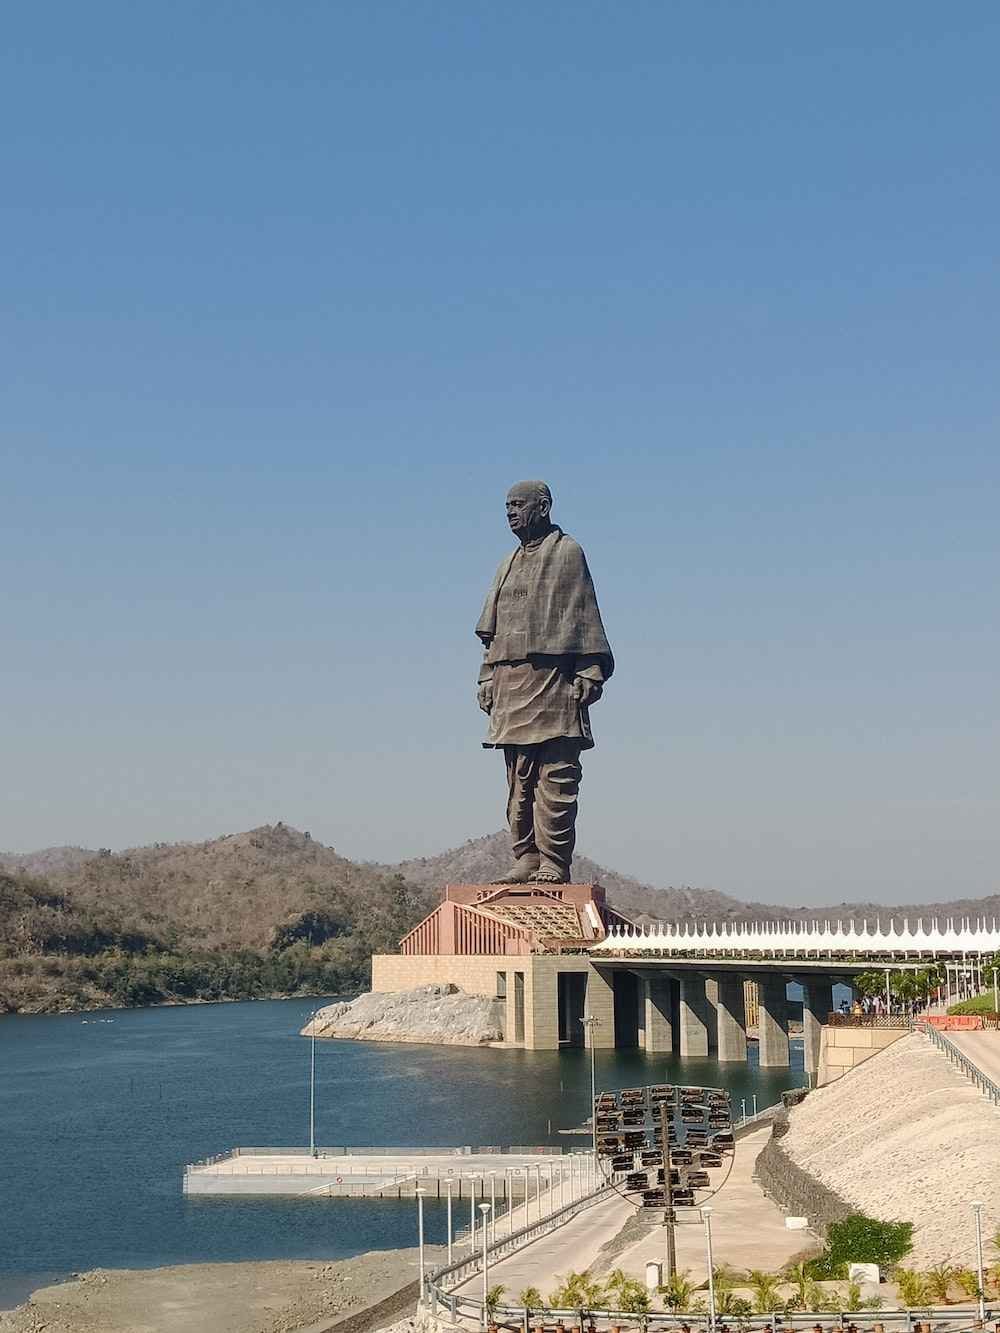 statue of unity photos inside
statue of unity photos height
statue of unity photos location
statue of unity photos name
statue of unity photos hd
statue of unity photoshoot
statue of unity photos gujarat
statue of unity photos price
statue of unity photos from space
statue of unity india height
statue of unity india from space
statue of unity india images
statue of unity india cost
statue of unity india map